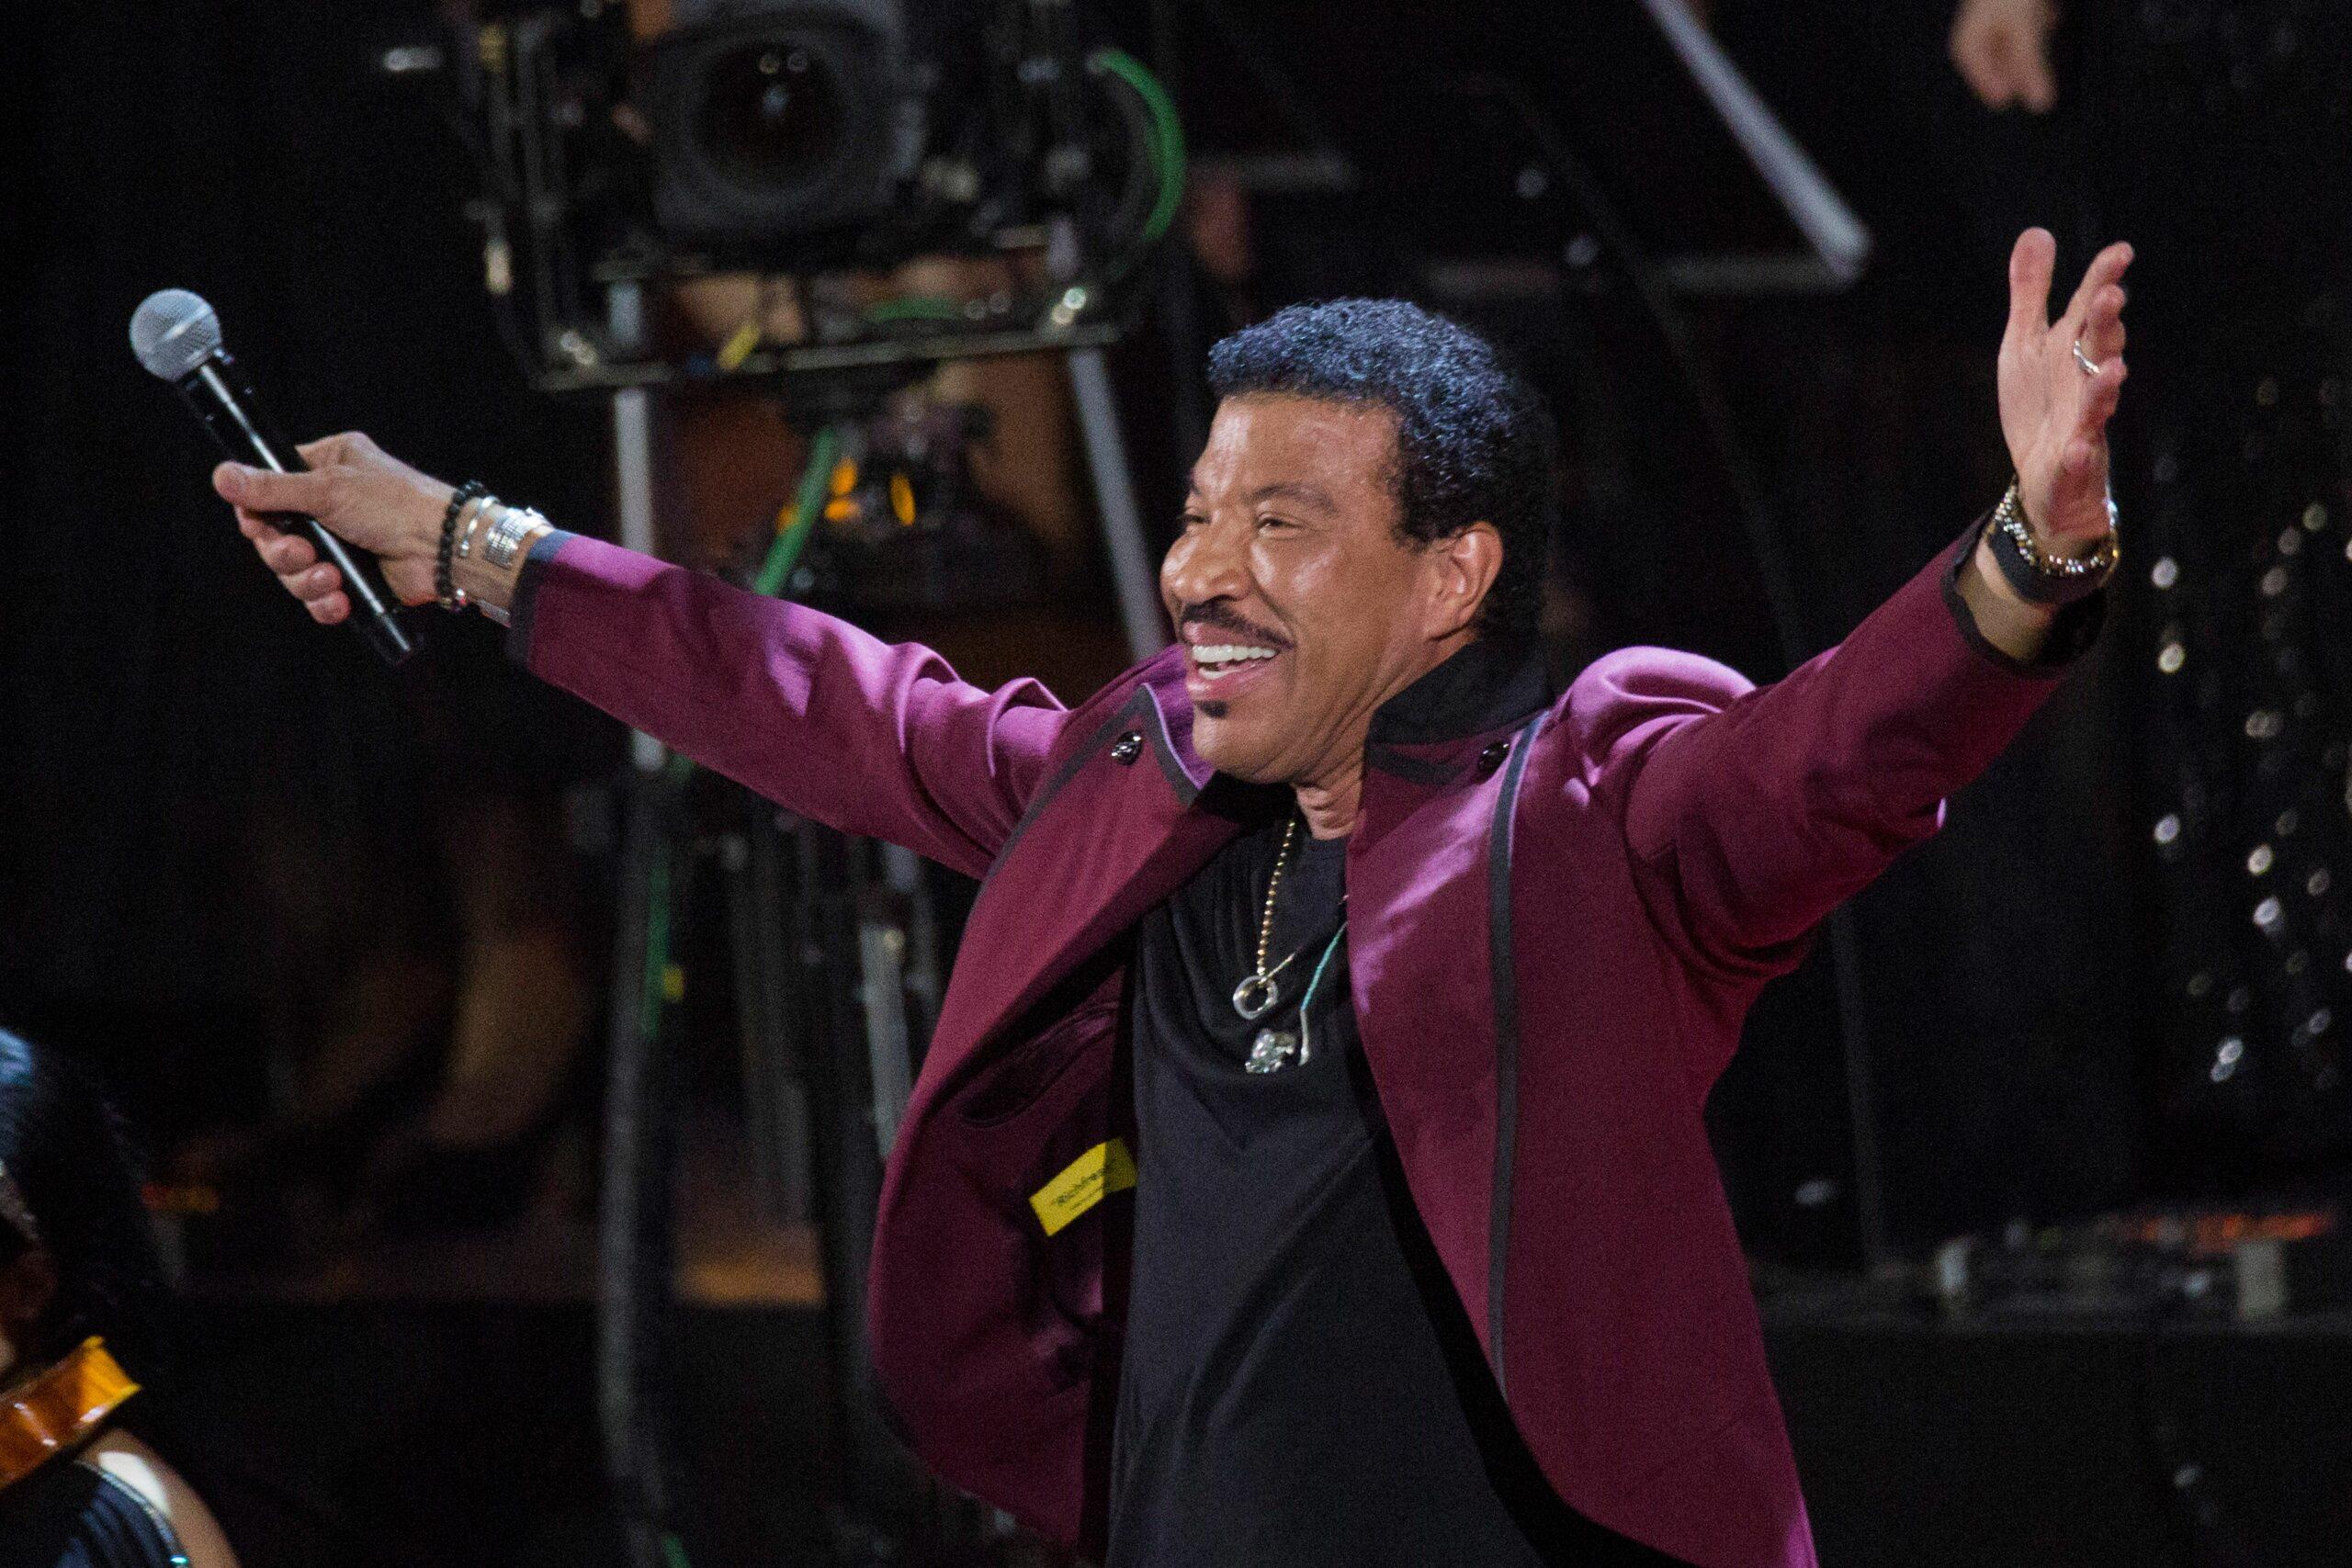 Lionel Richie at Christmas Concert in Vatican